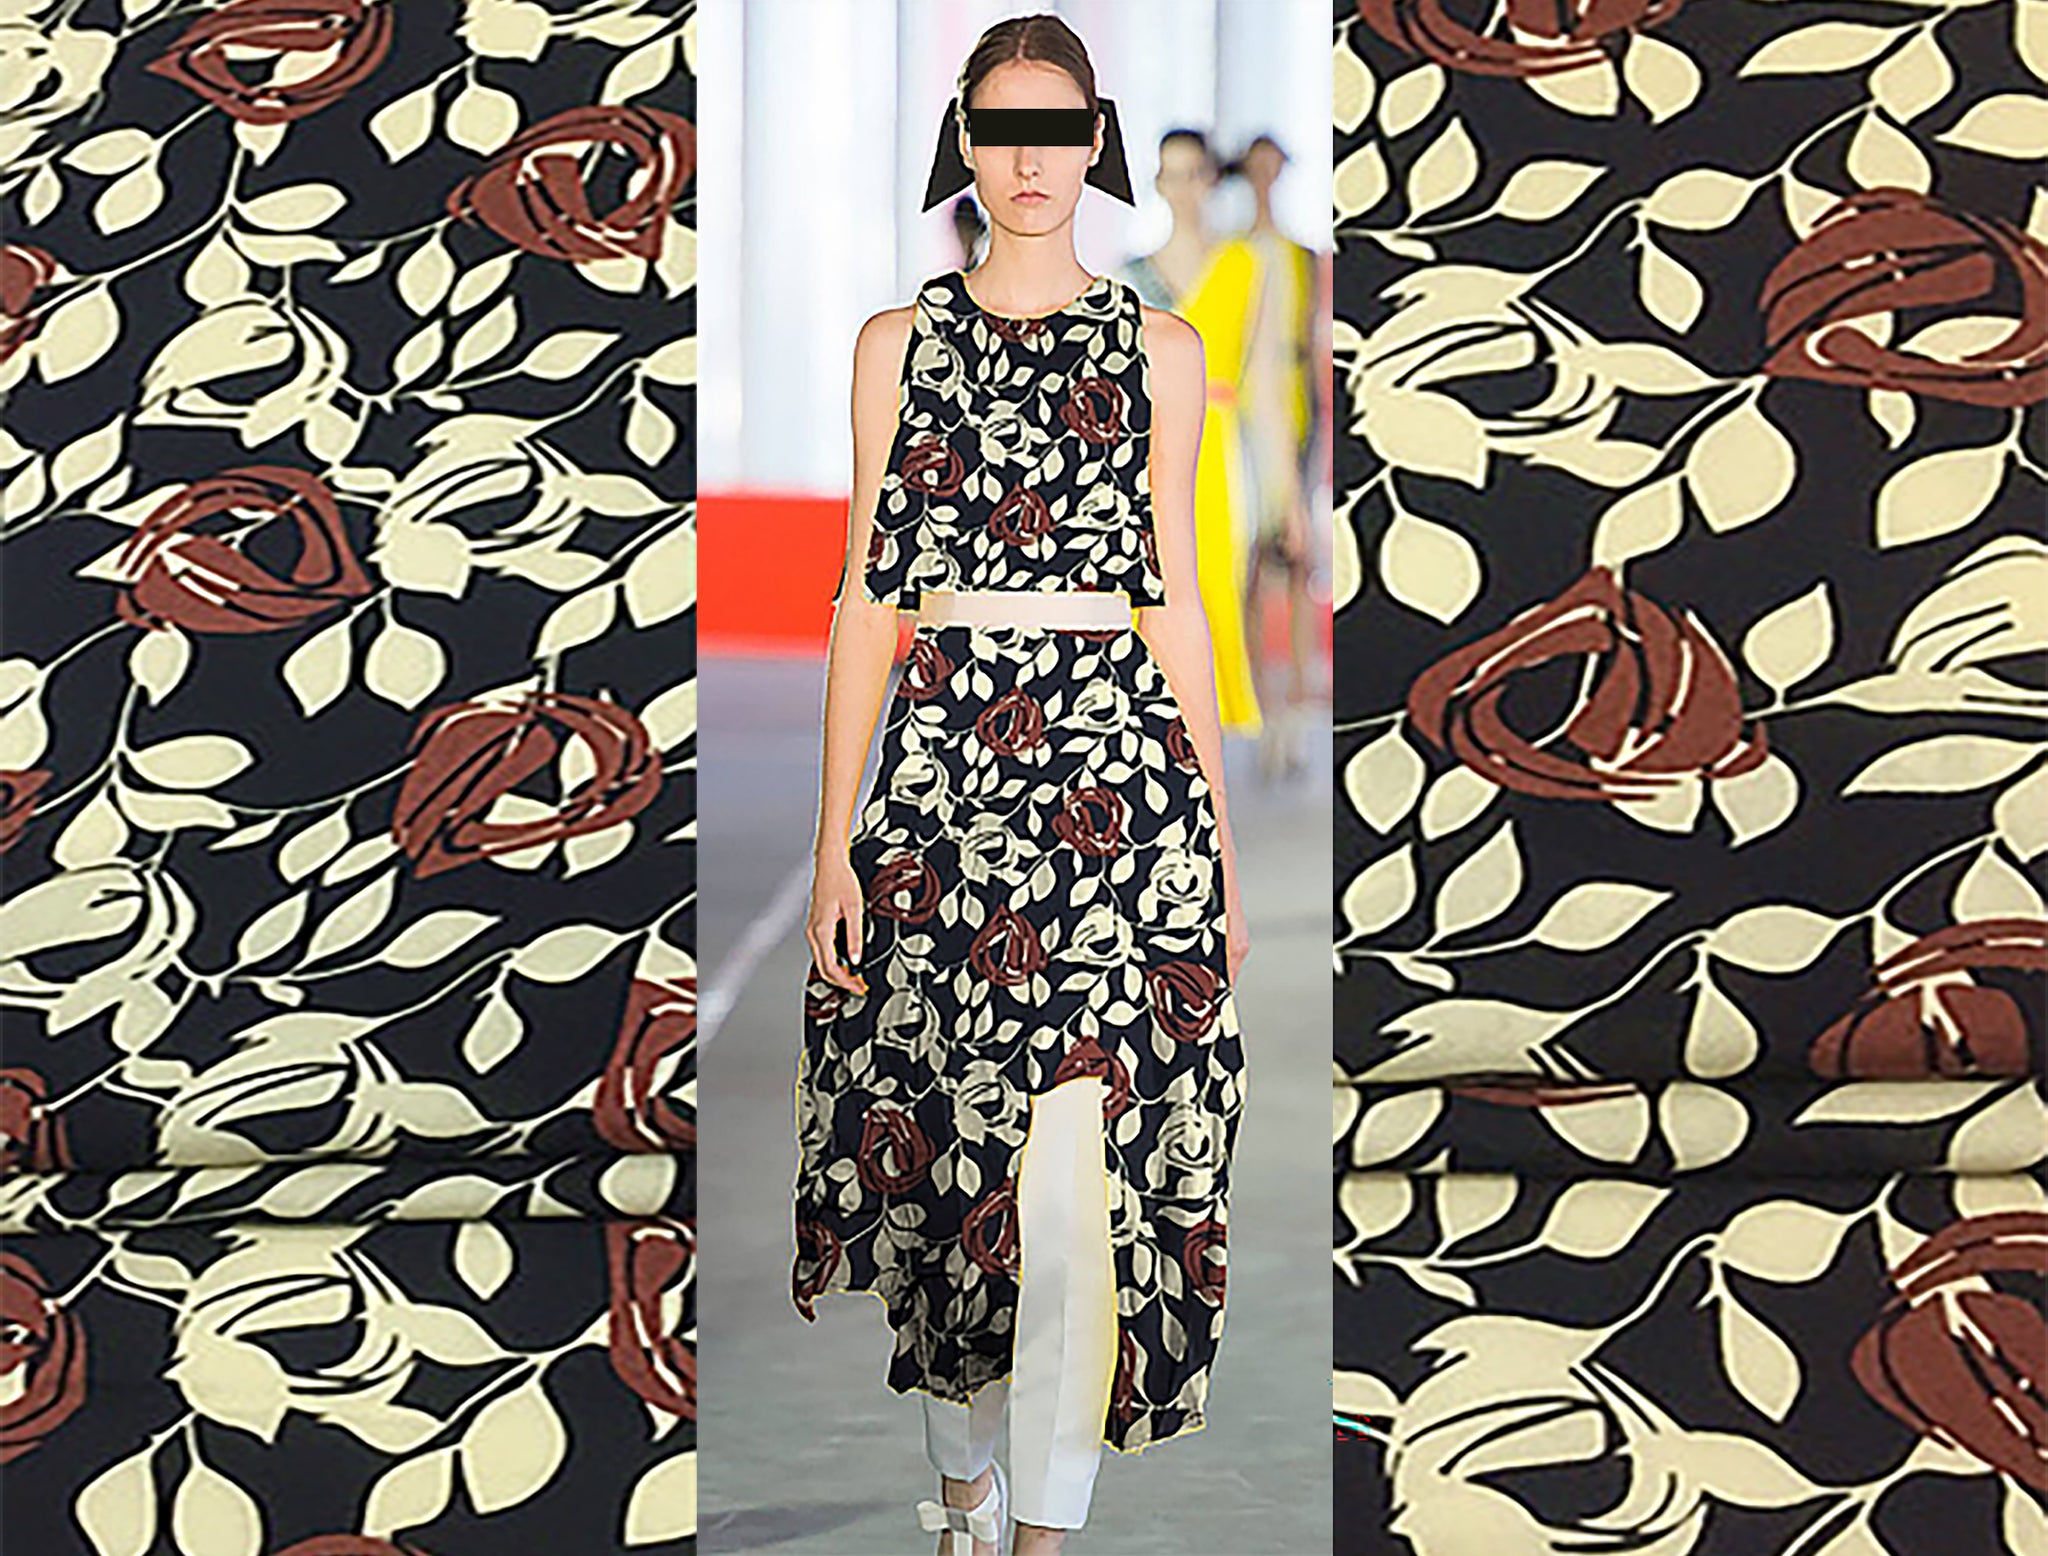 Beige/Chocolate Brown Floral on Black Background- Crepe de Chine - 19 MM Weight - 112 cm Wide.